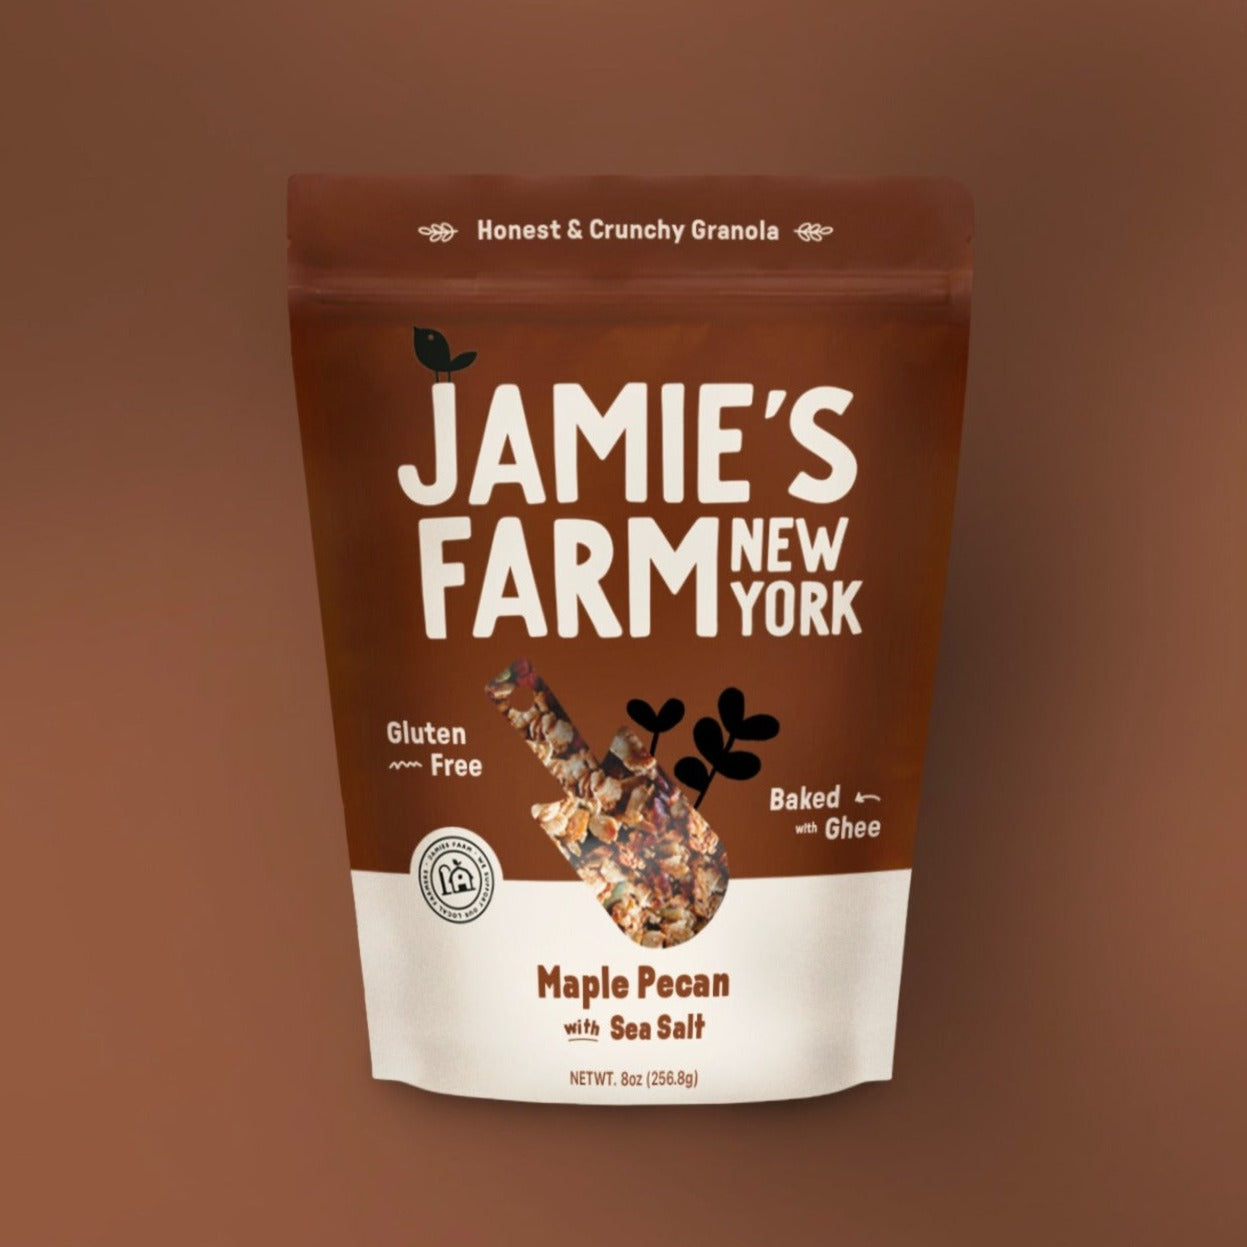 Jamie's Farm Gluten-Free and Organic Maple Pecan Granola with Sea Salt - Baked with Ghee